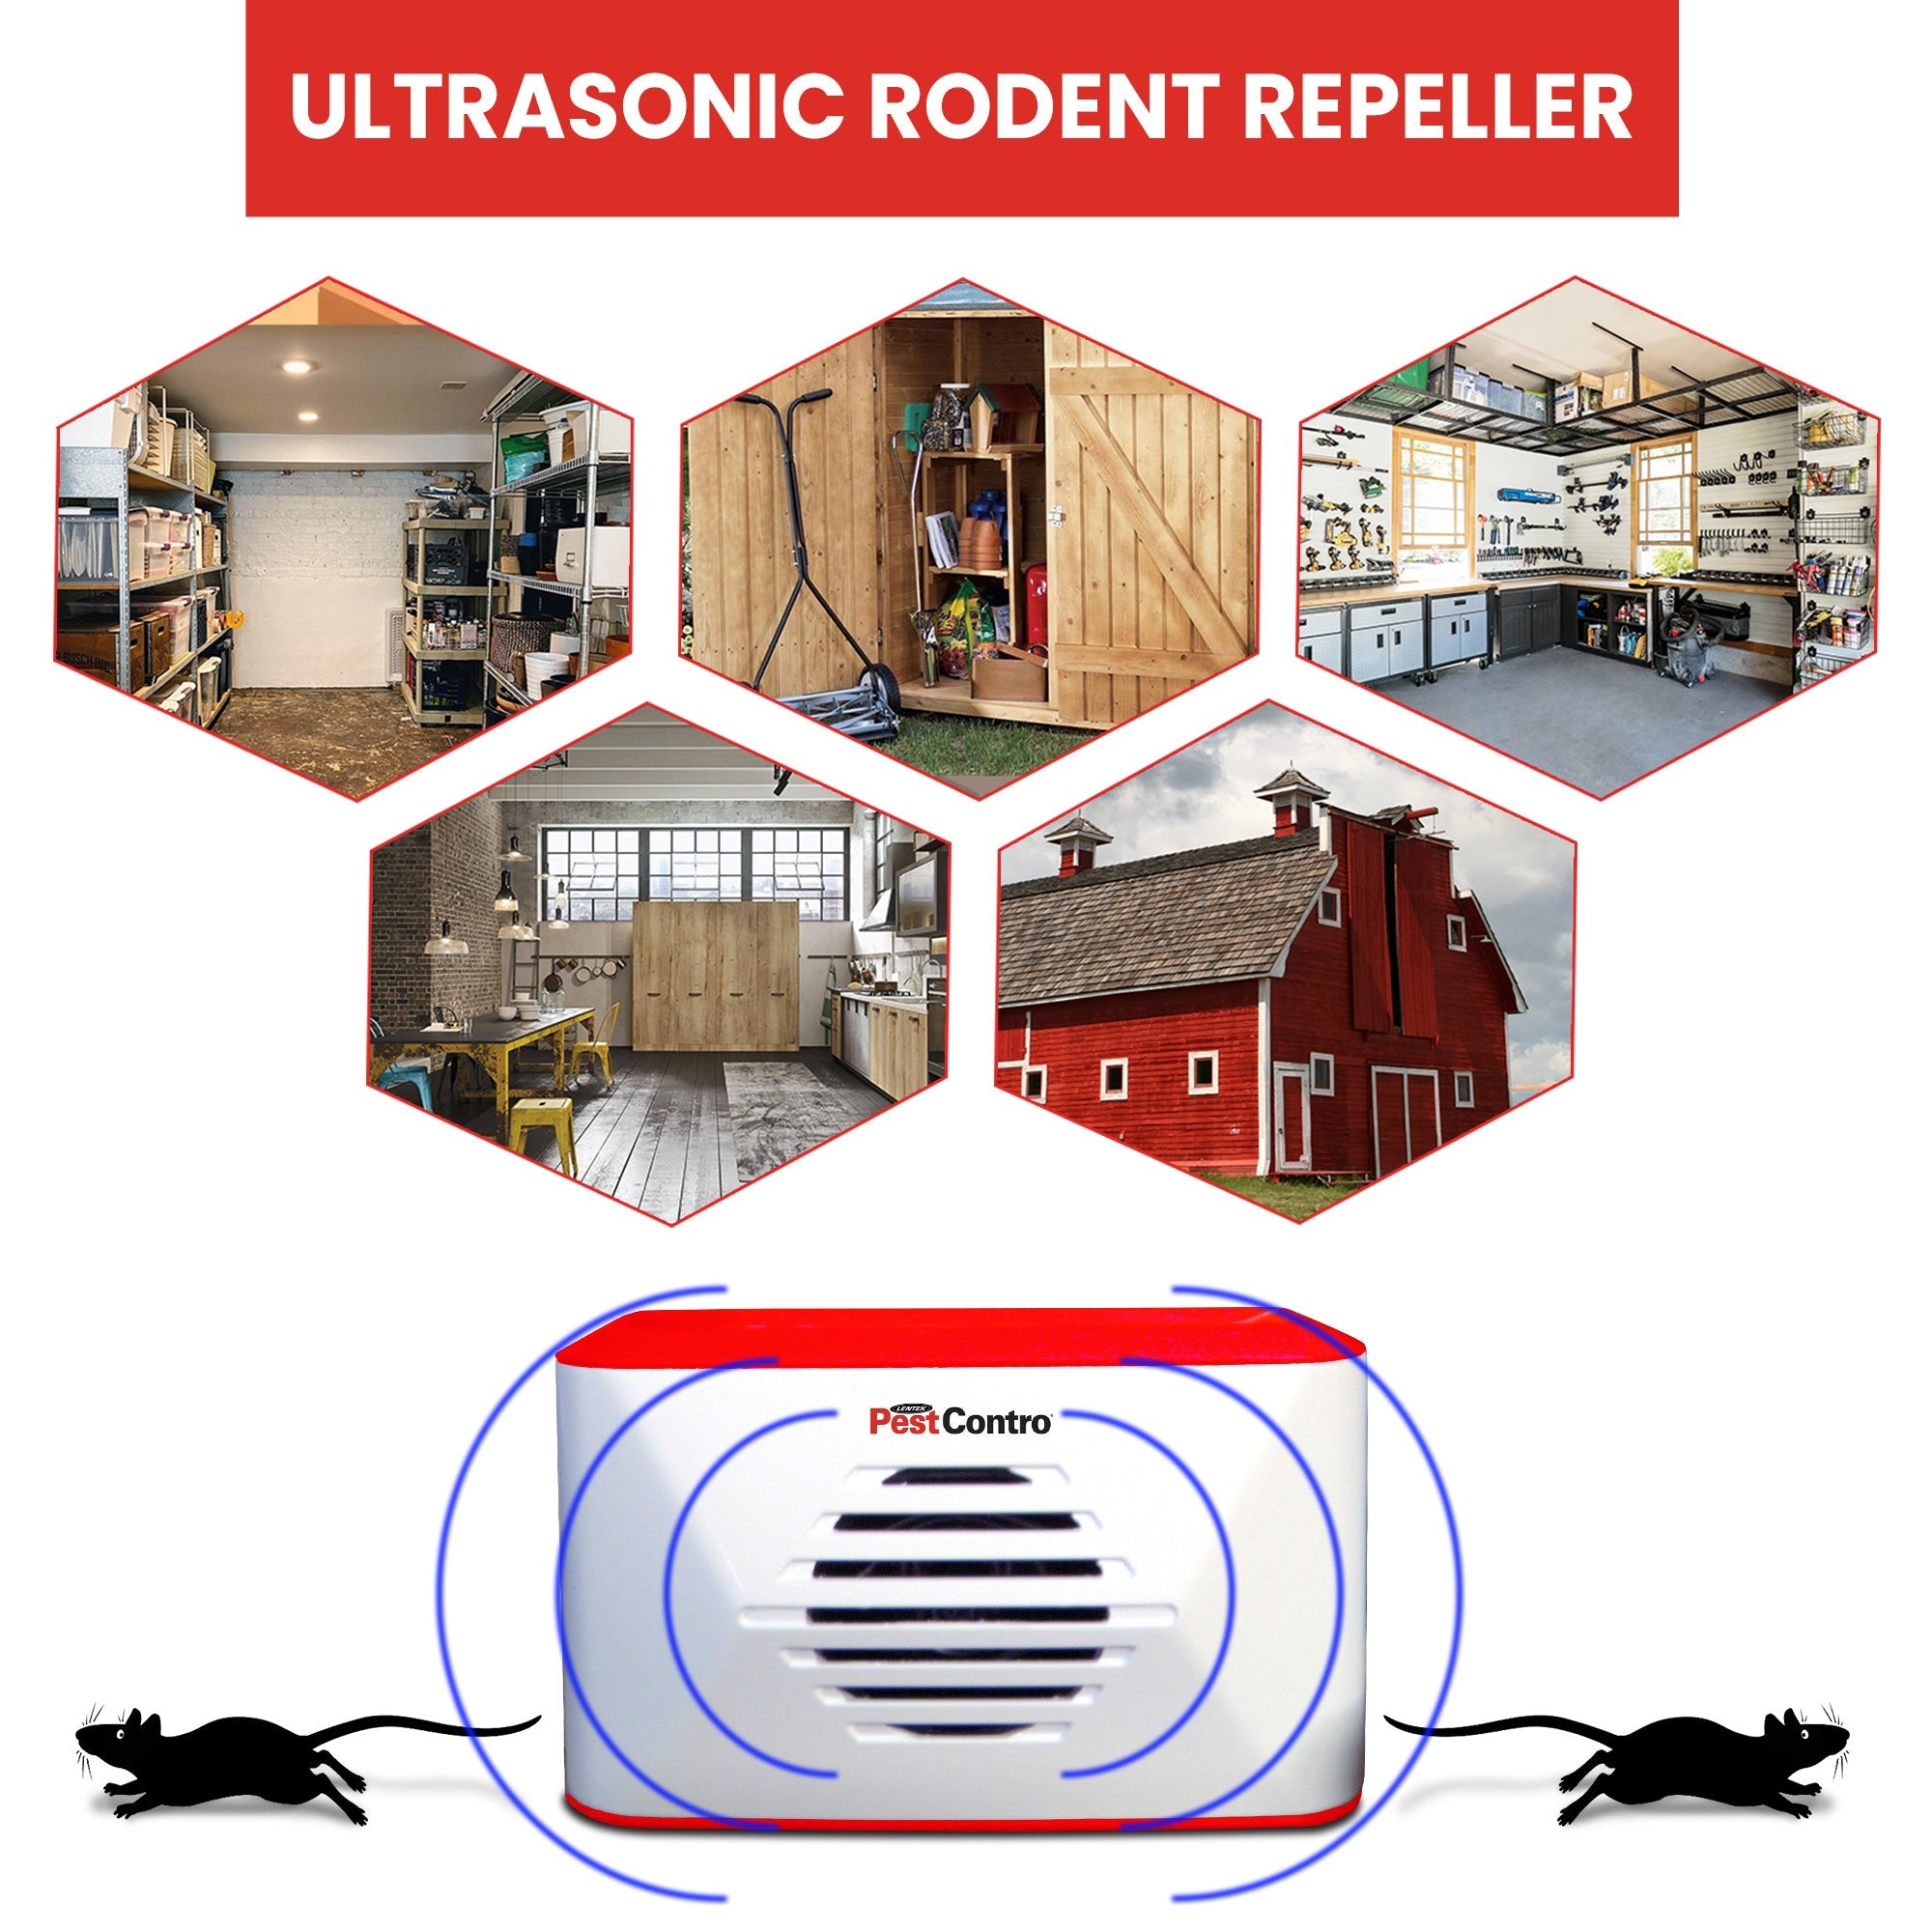 Product shot of PestContro portable ultrasonic rodent repeller with images of mice running away from either side. Five lifestyle images above show settings where it can be used: Storage room, outdoor tool shed, garage, workshop, barn